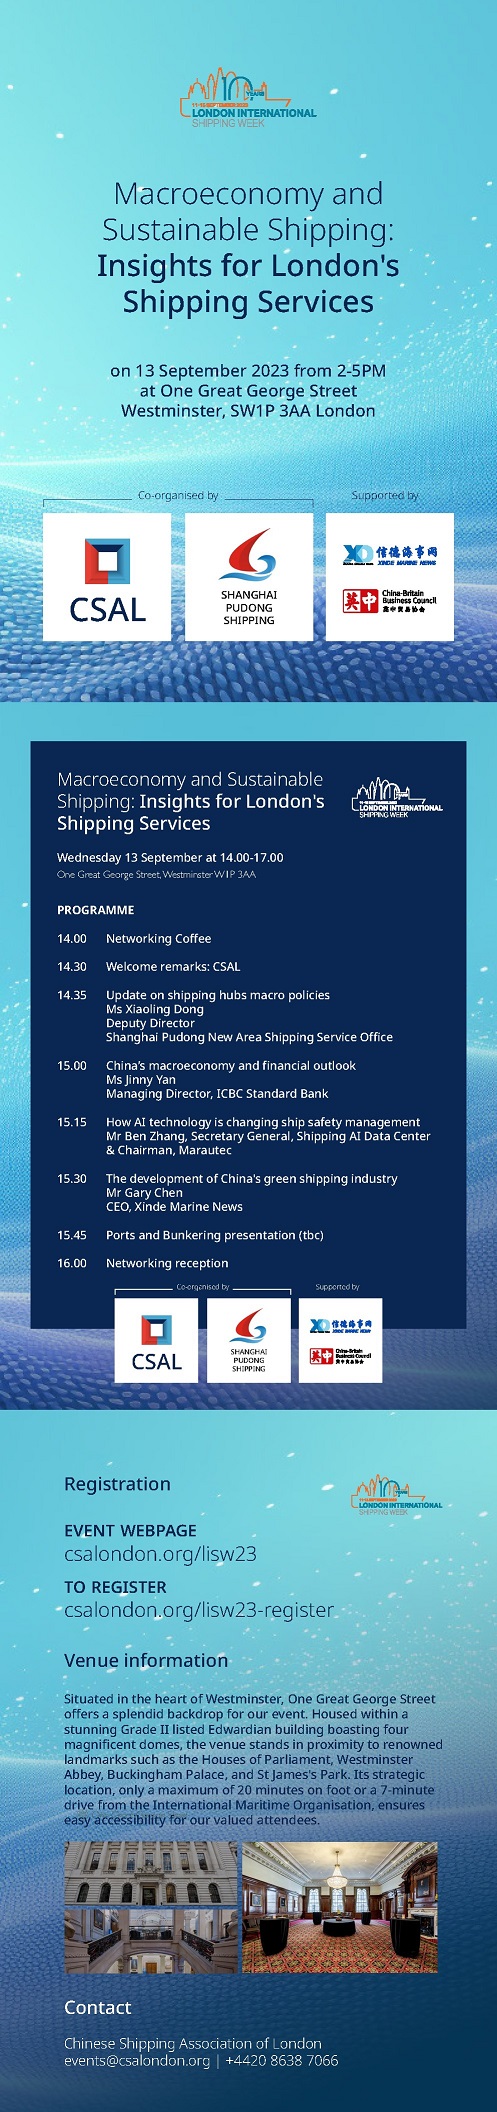 LISW23 - Macroeconomy and Sustainable Shipping